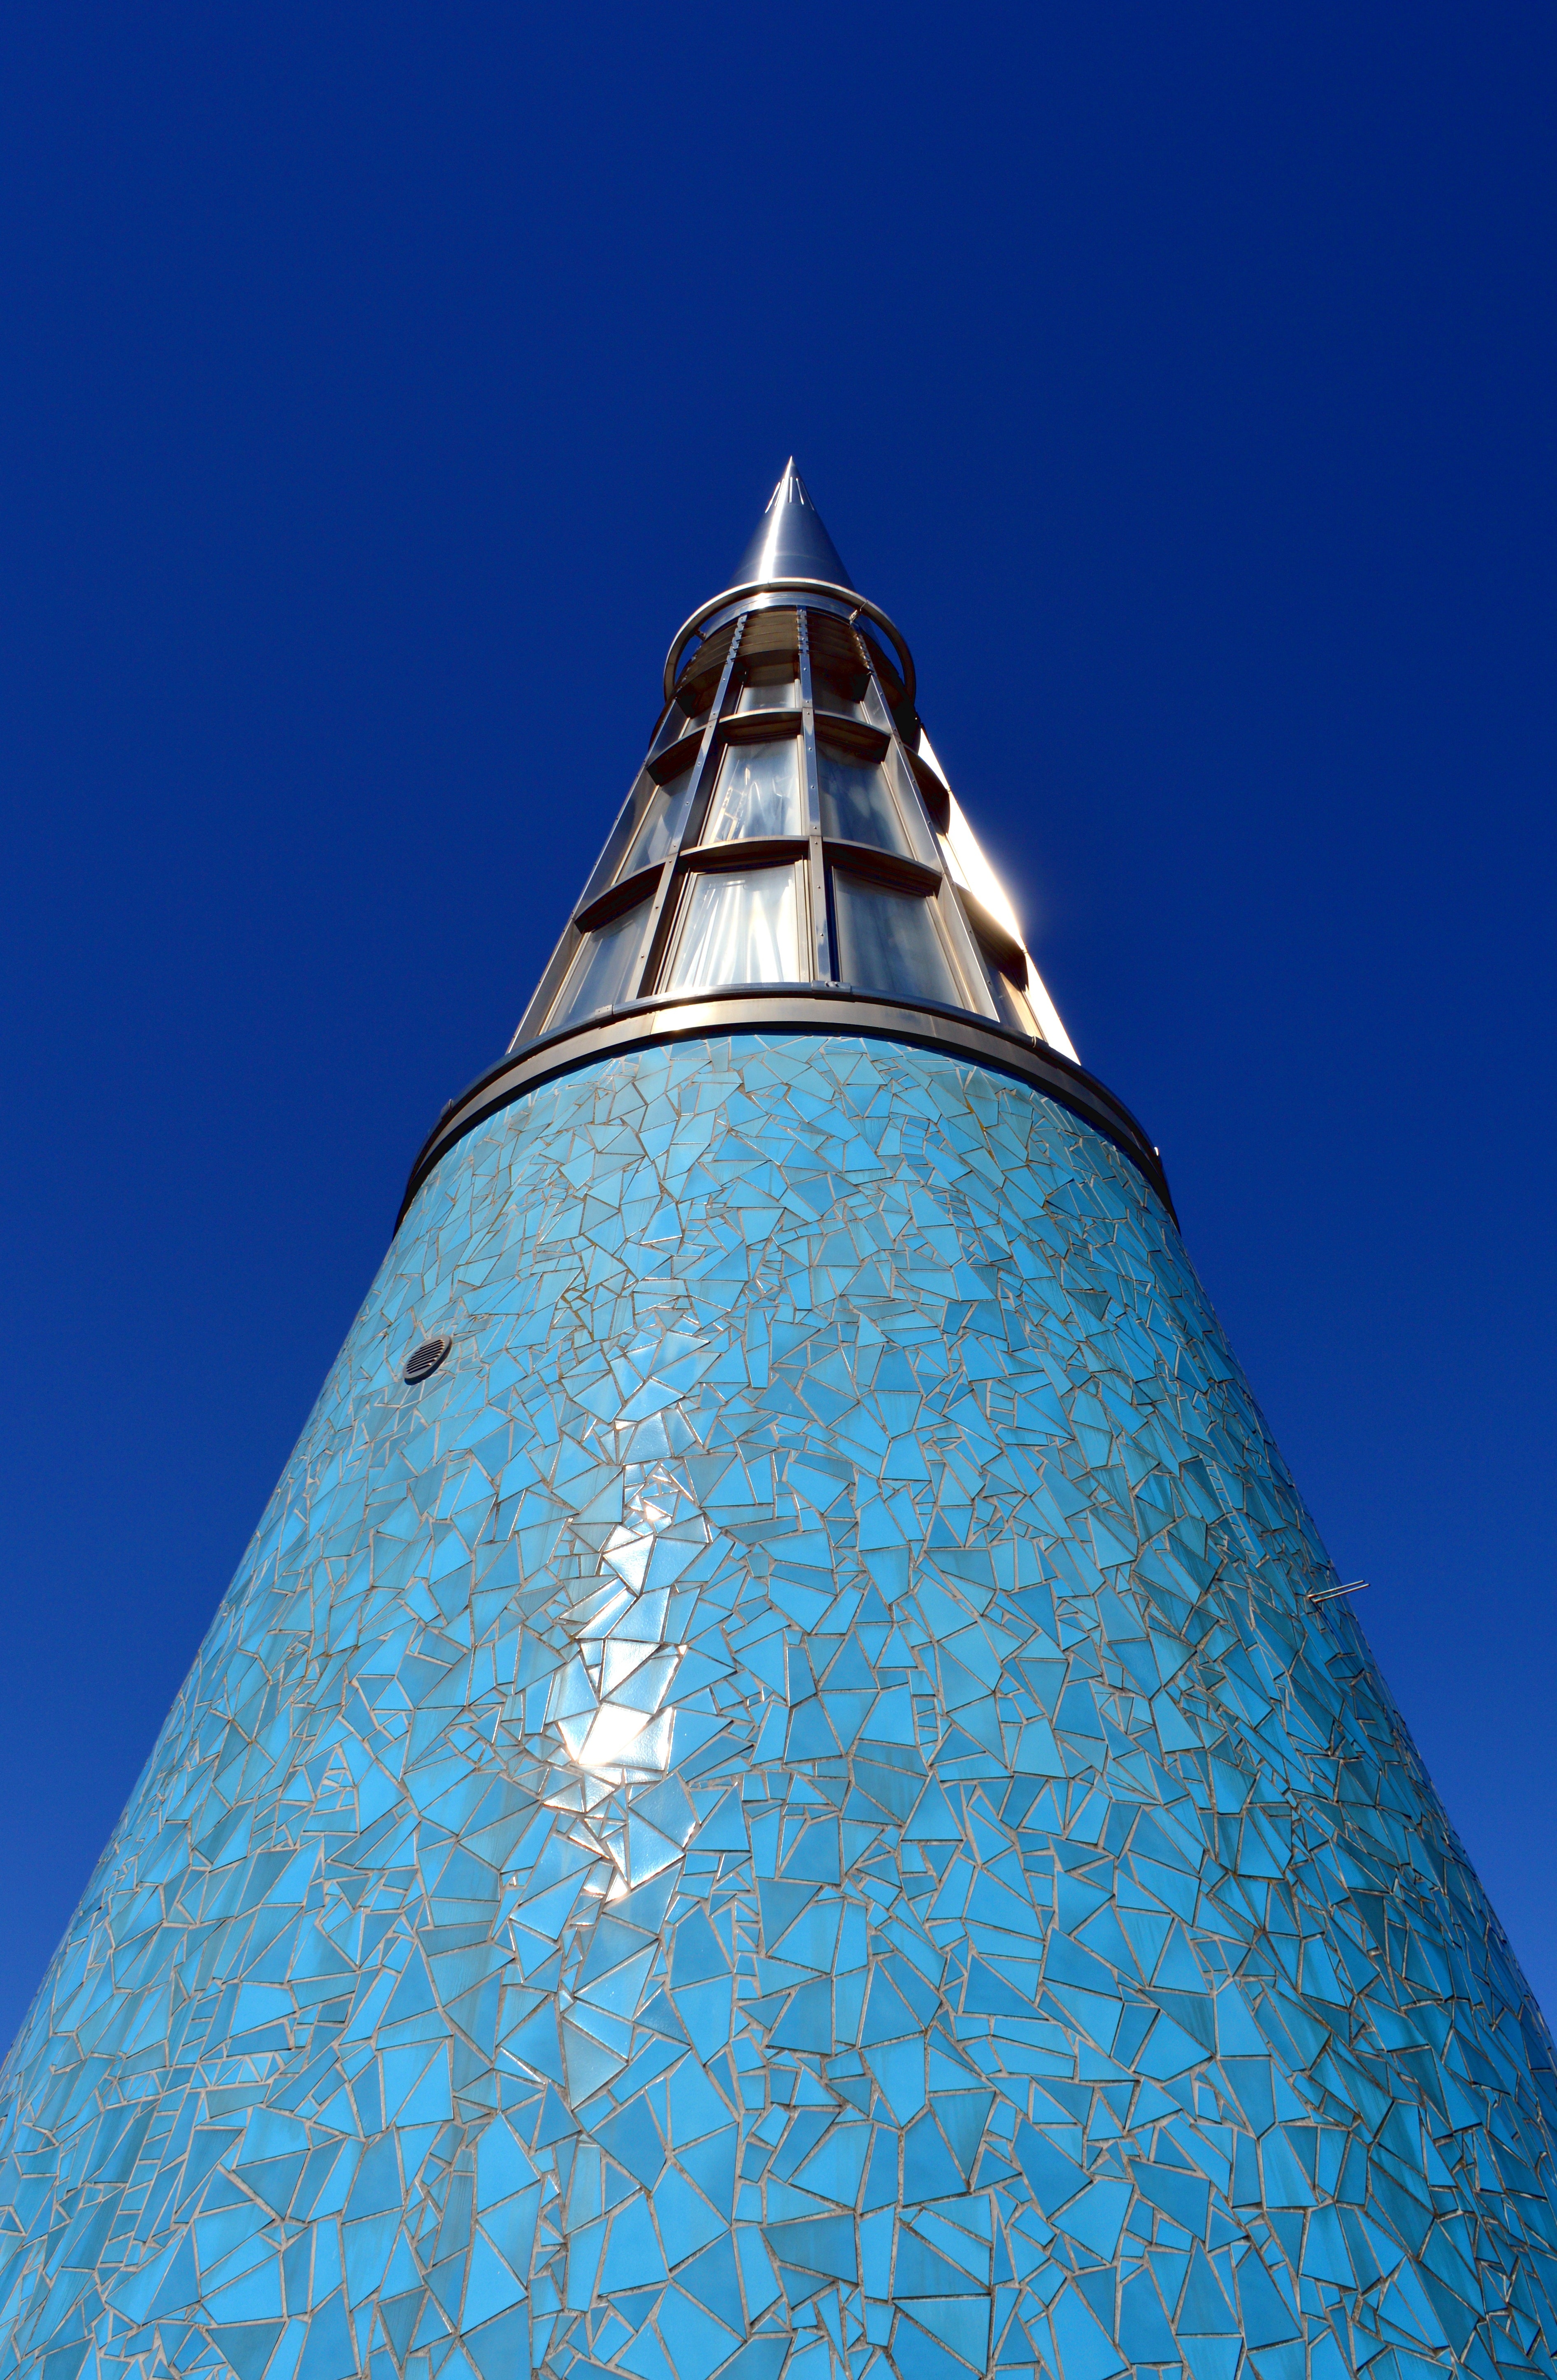 grey and blue pointed tower